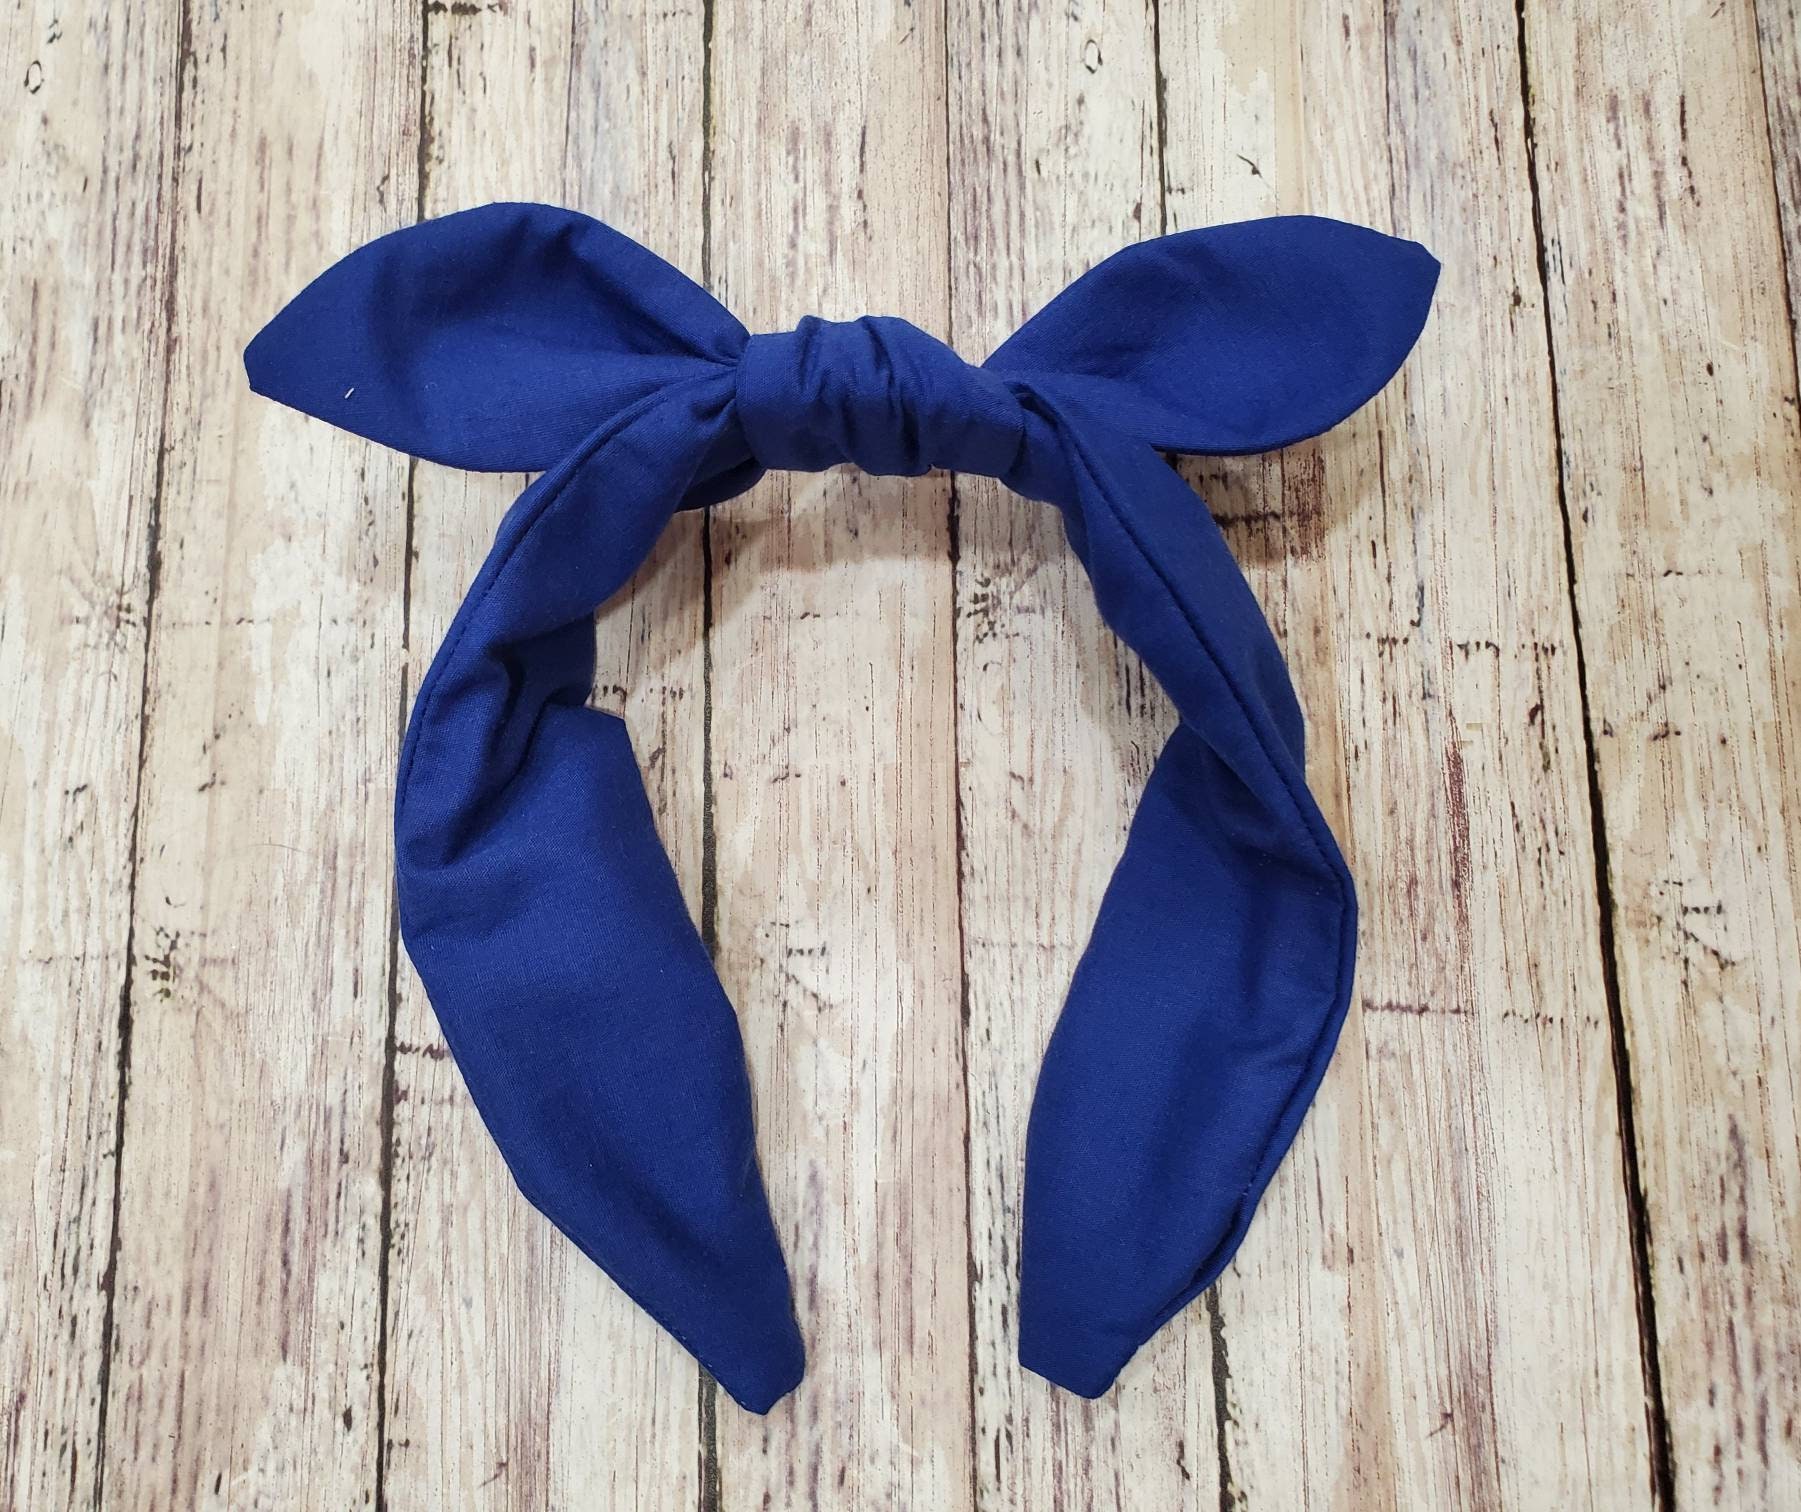 Solid Royal Blue Boutique Hair Bow on Woven Headband 